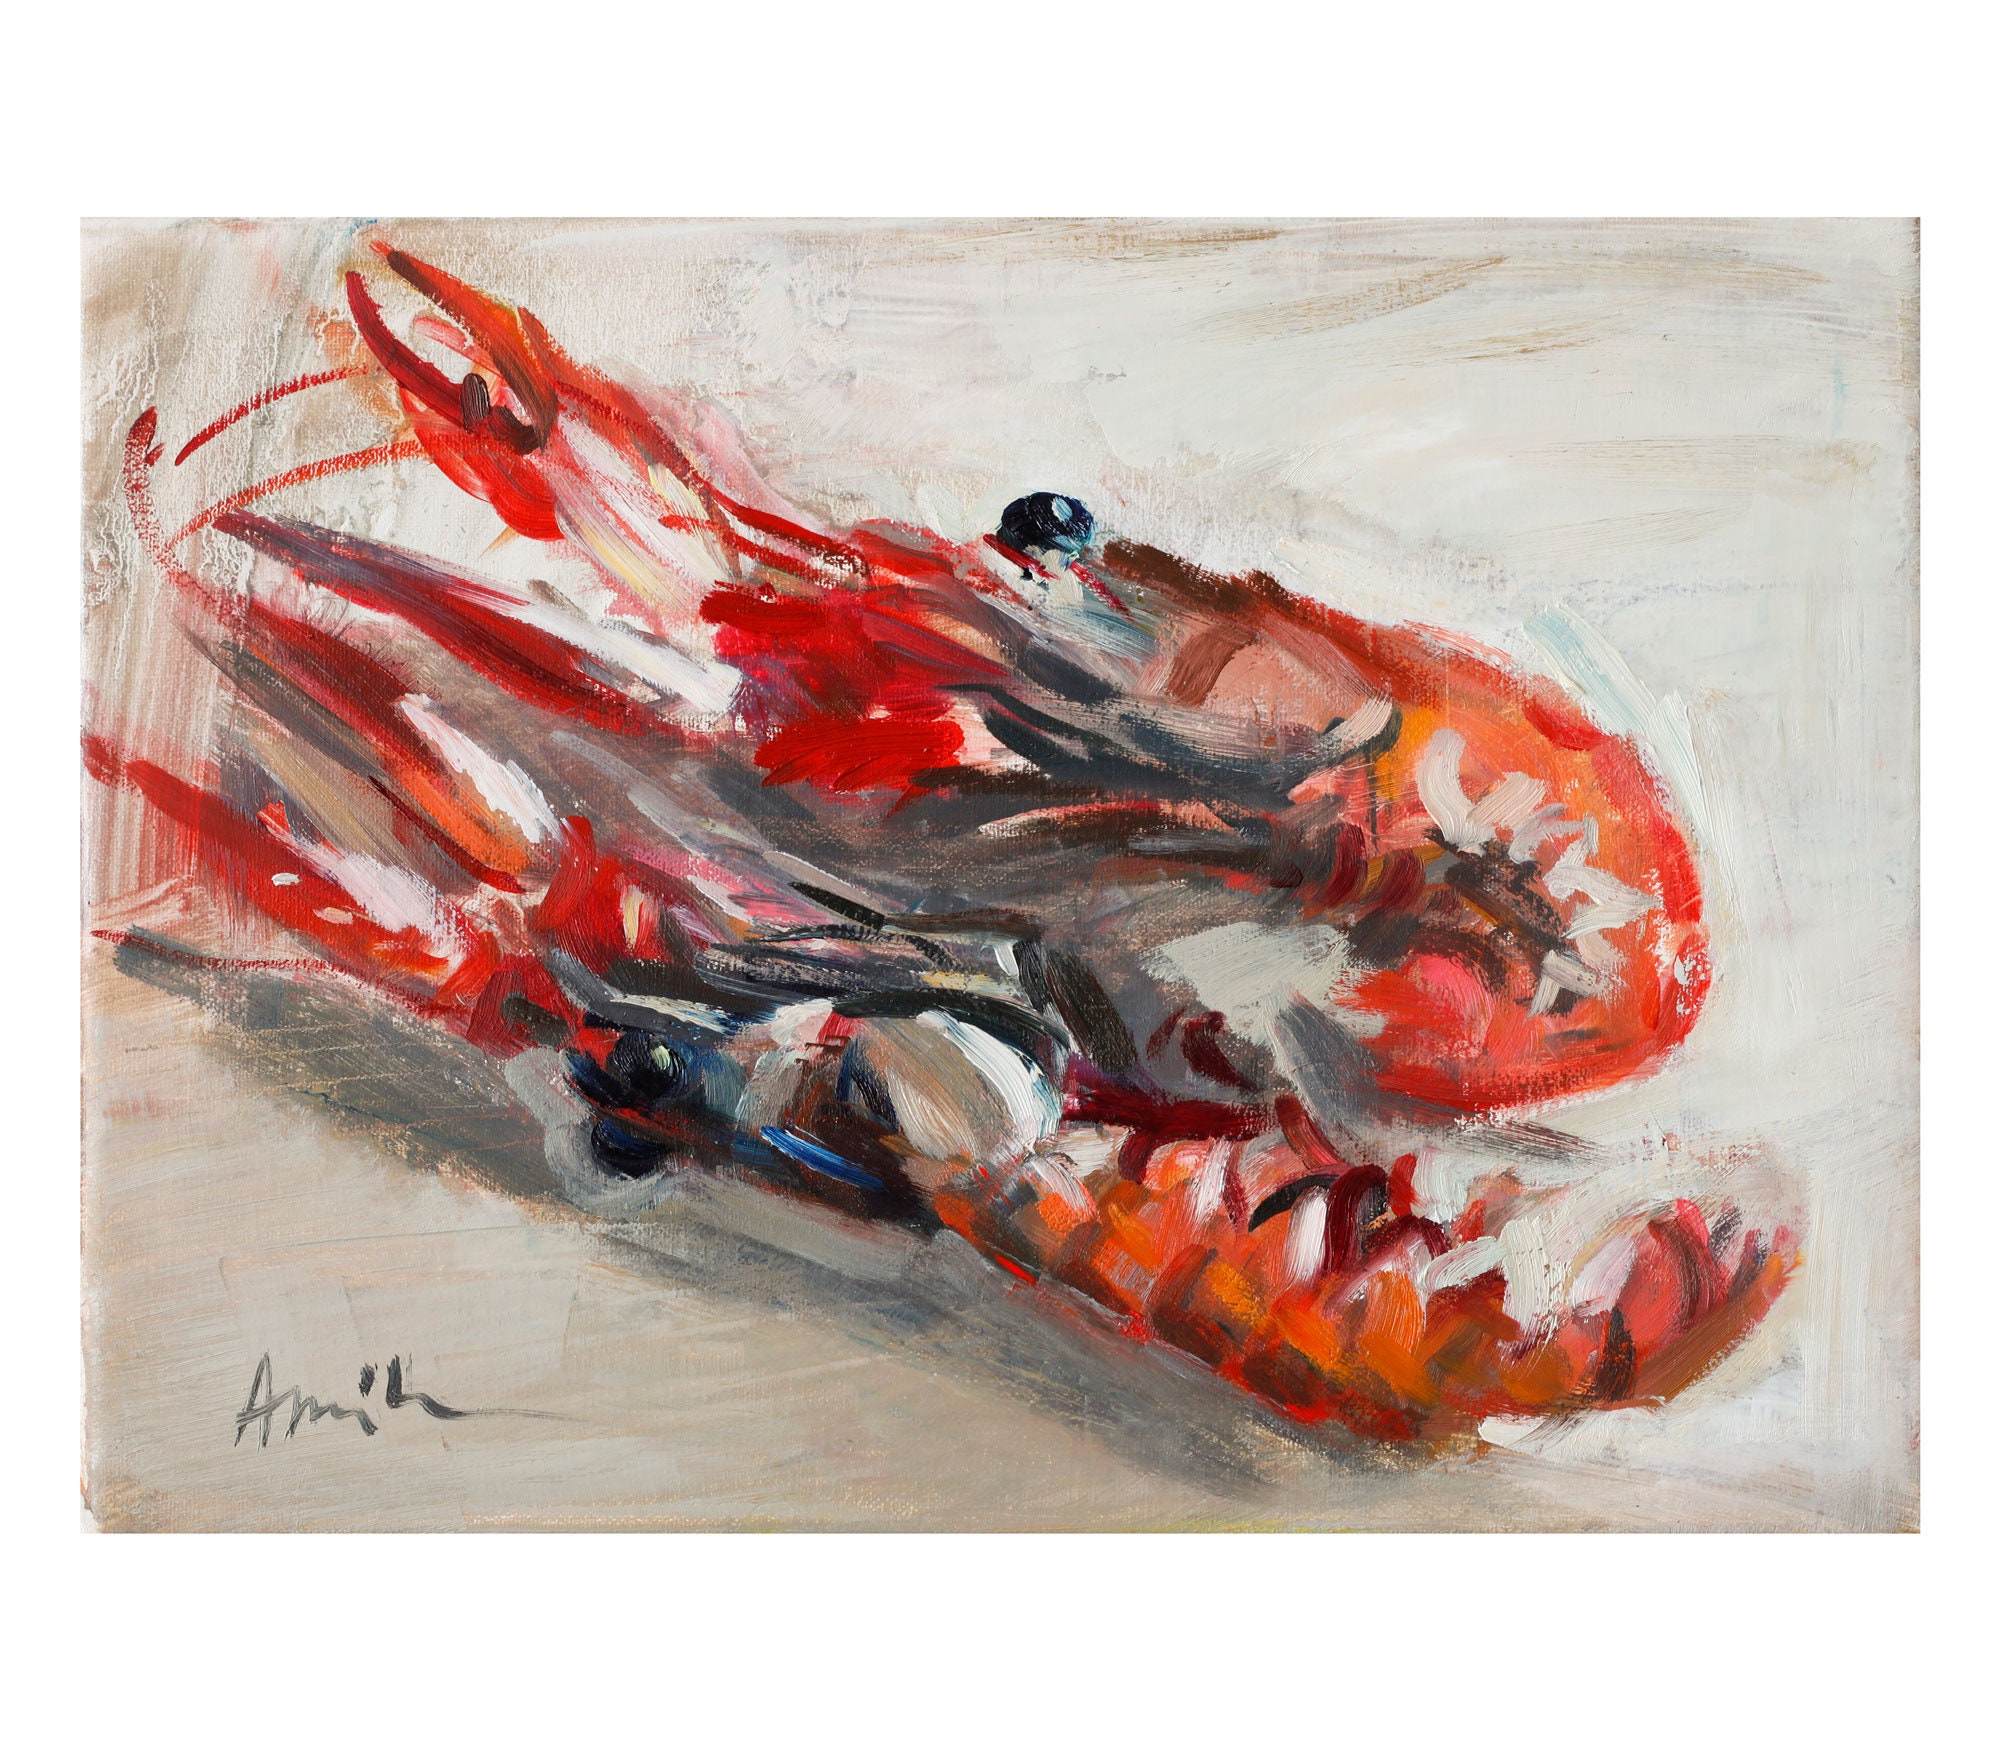 Giclee Fine Art Print Two Norway Lobsters Original Oil Painting Paintings Food Seafood Still Life Lobster Shrimp Prawn Fish Fishy Red Orange